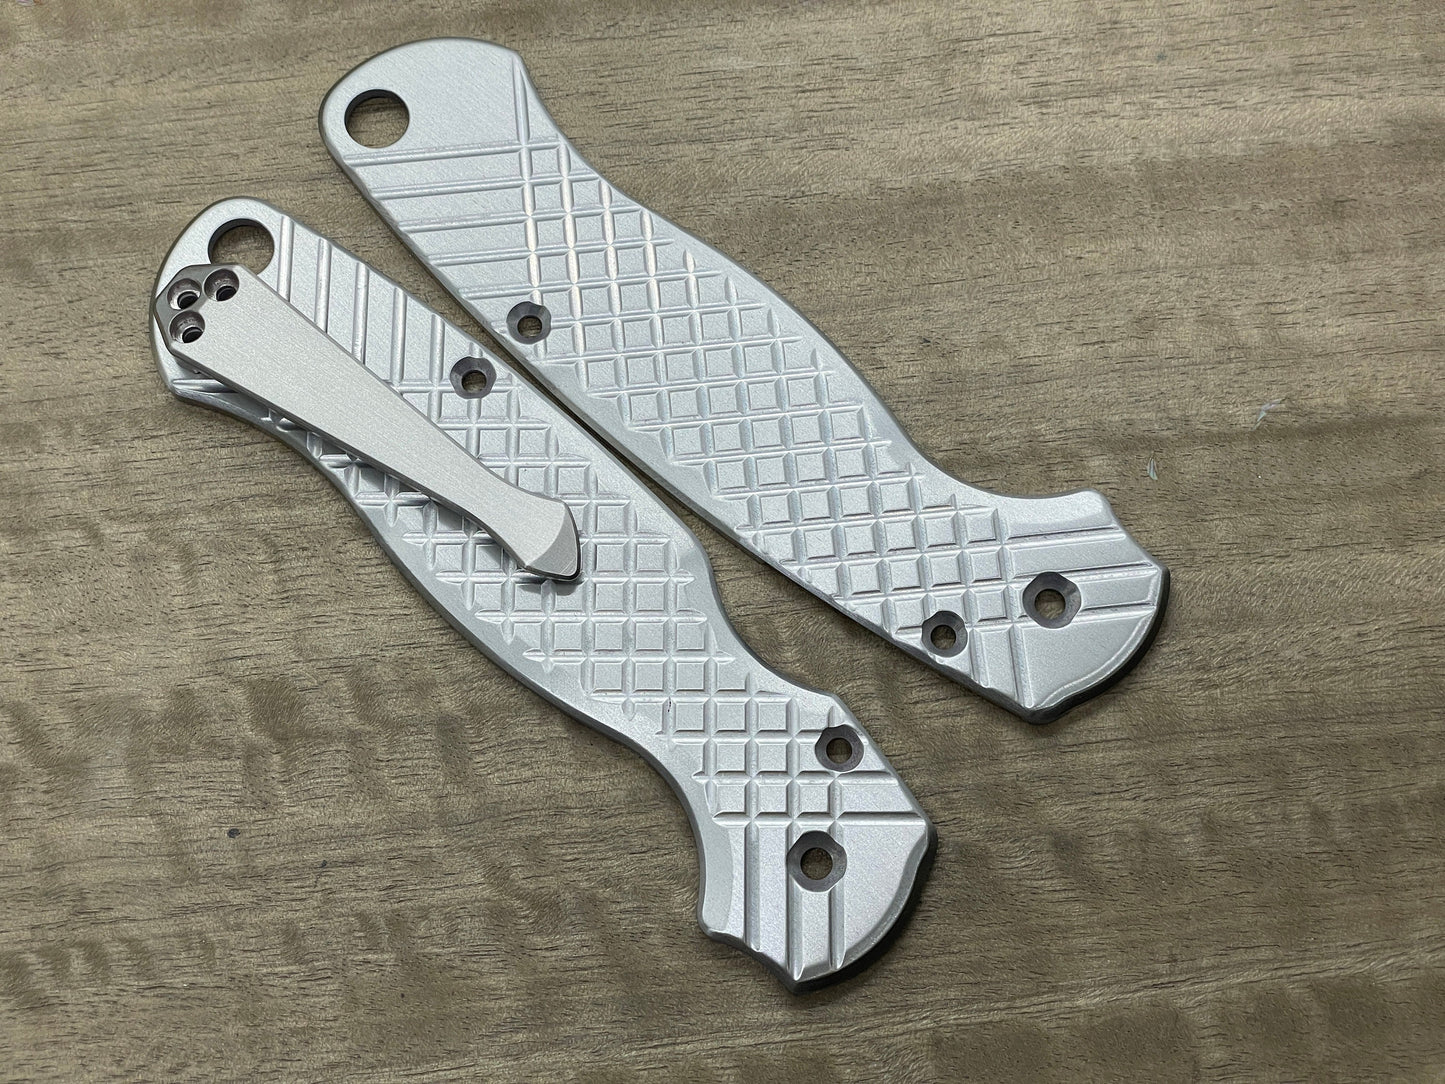 Redesigned FRAG milled Aerospace Aluminum Scales for Spyderco Para 3